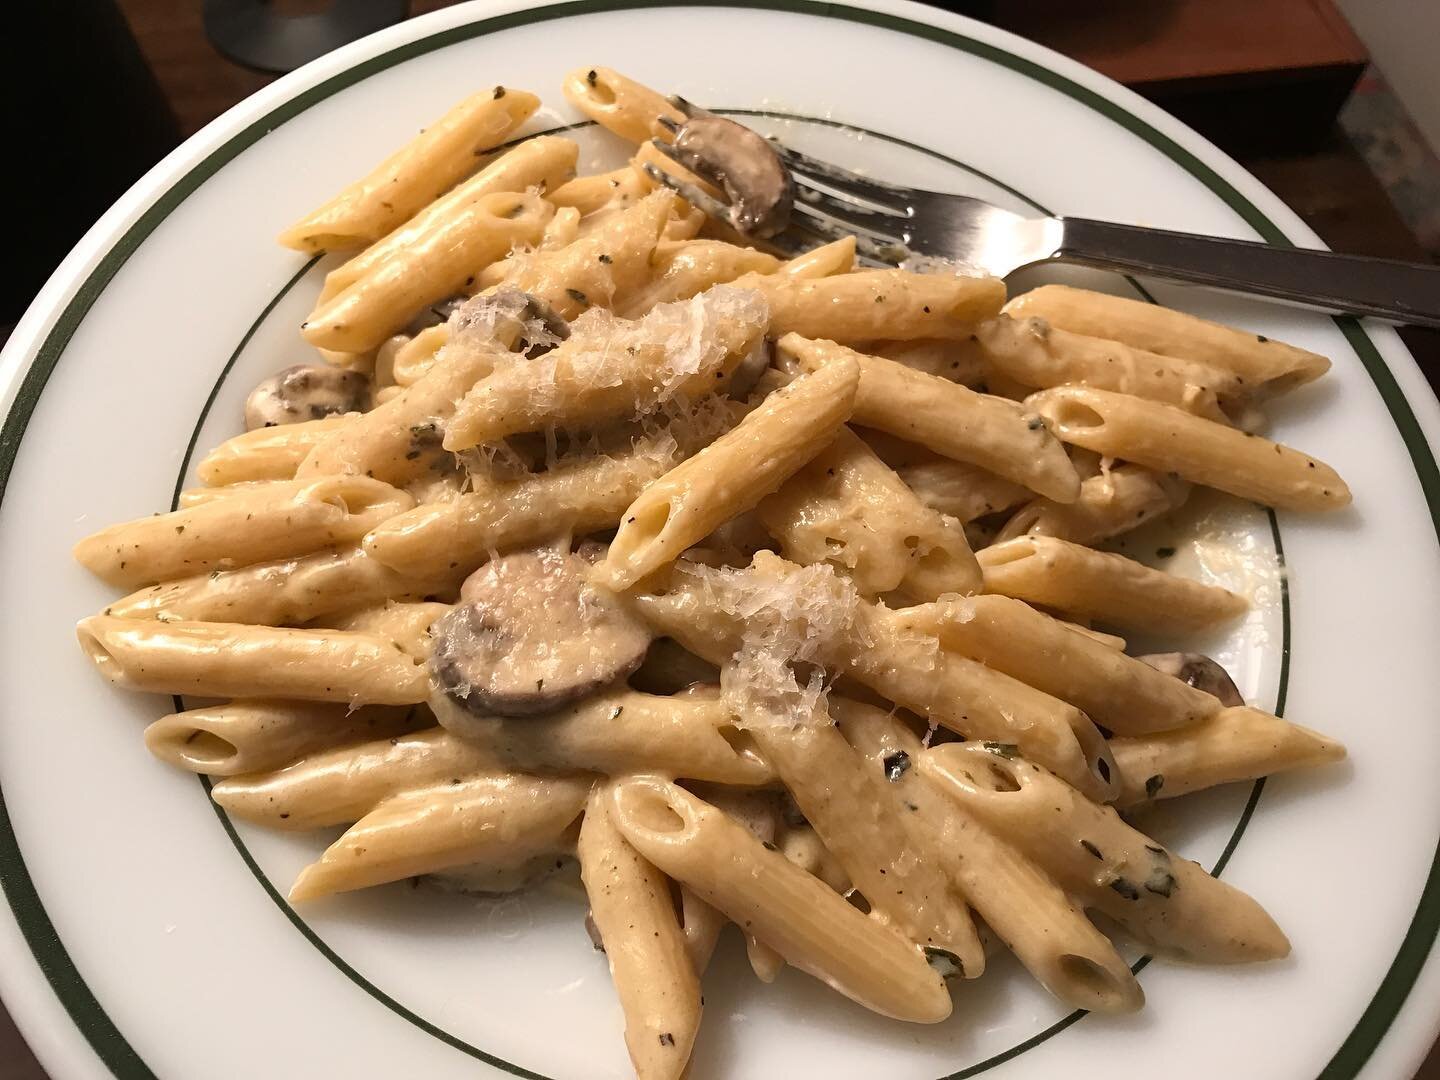 A Penne Pasta in a Baby Bella Mushroom Parmesan Garlic and Lemon Cream Sauce. The flavor and texture were fit to start the new year in style! #pasta #italianfood #italiancuisine #foodie #foodpics #cuisine #chef #chefsofinstagram #finecooking #gourmet